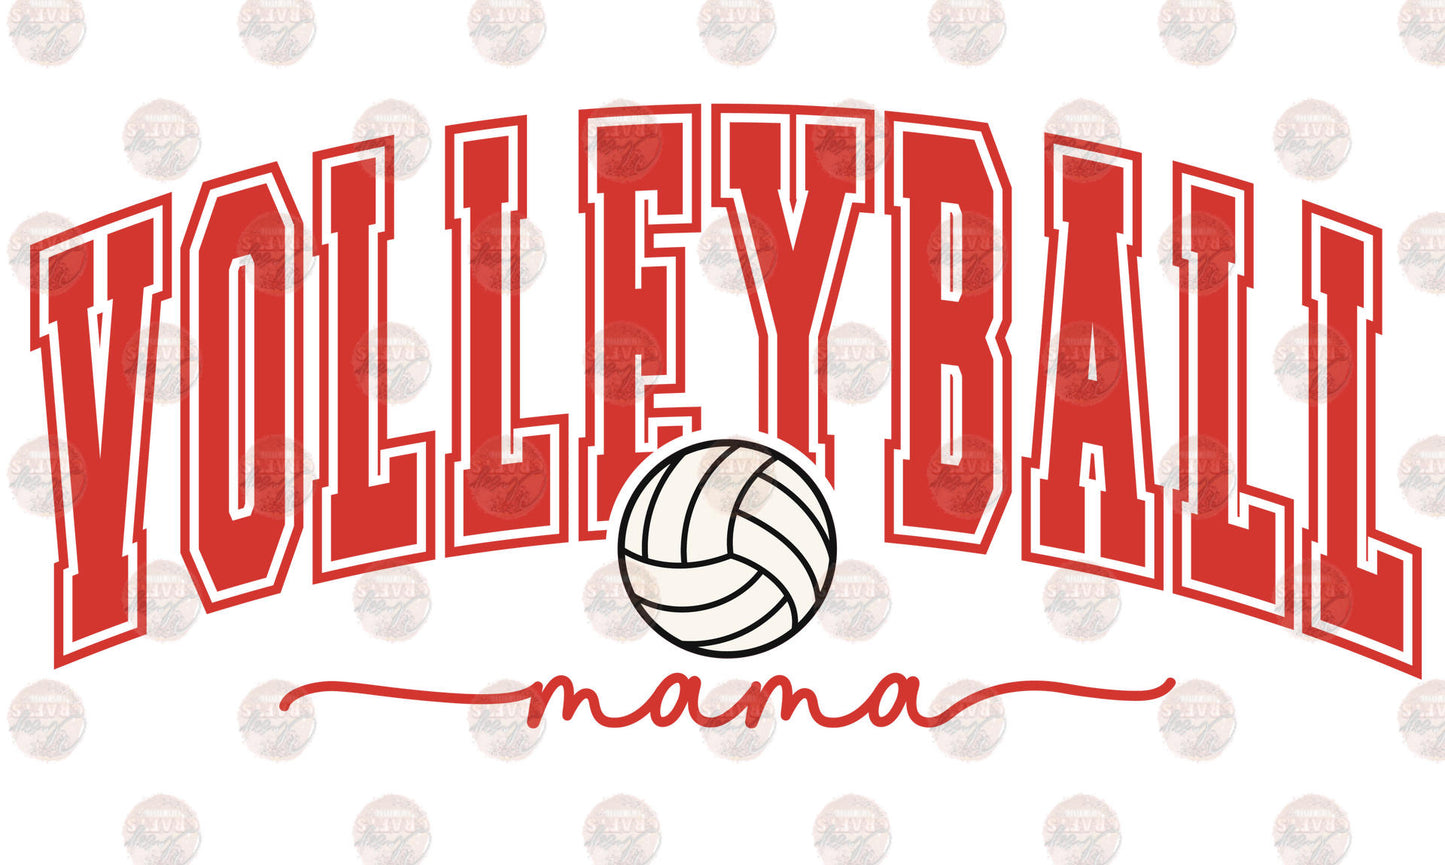 Volleyball Mama Red Transfer